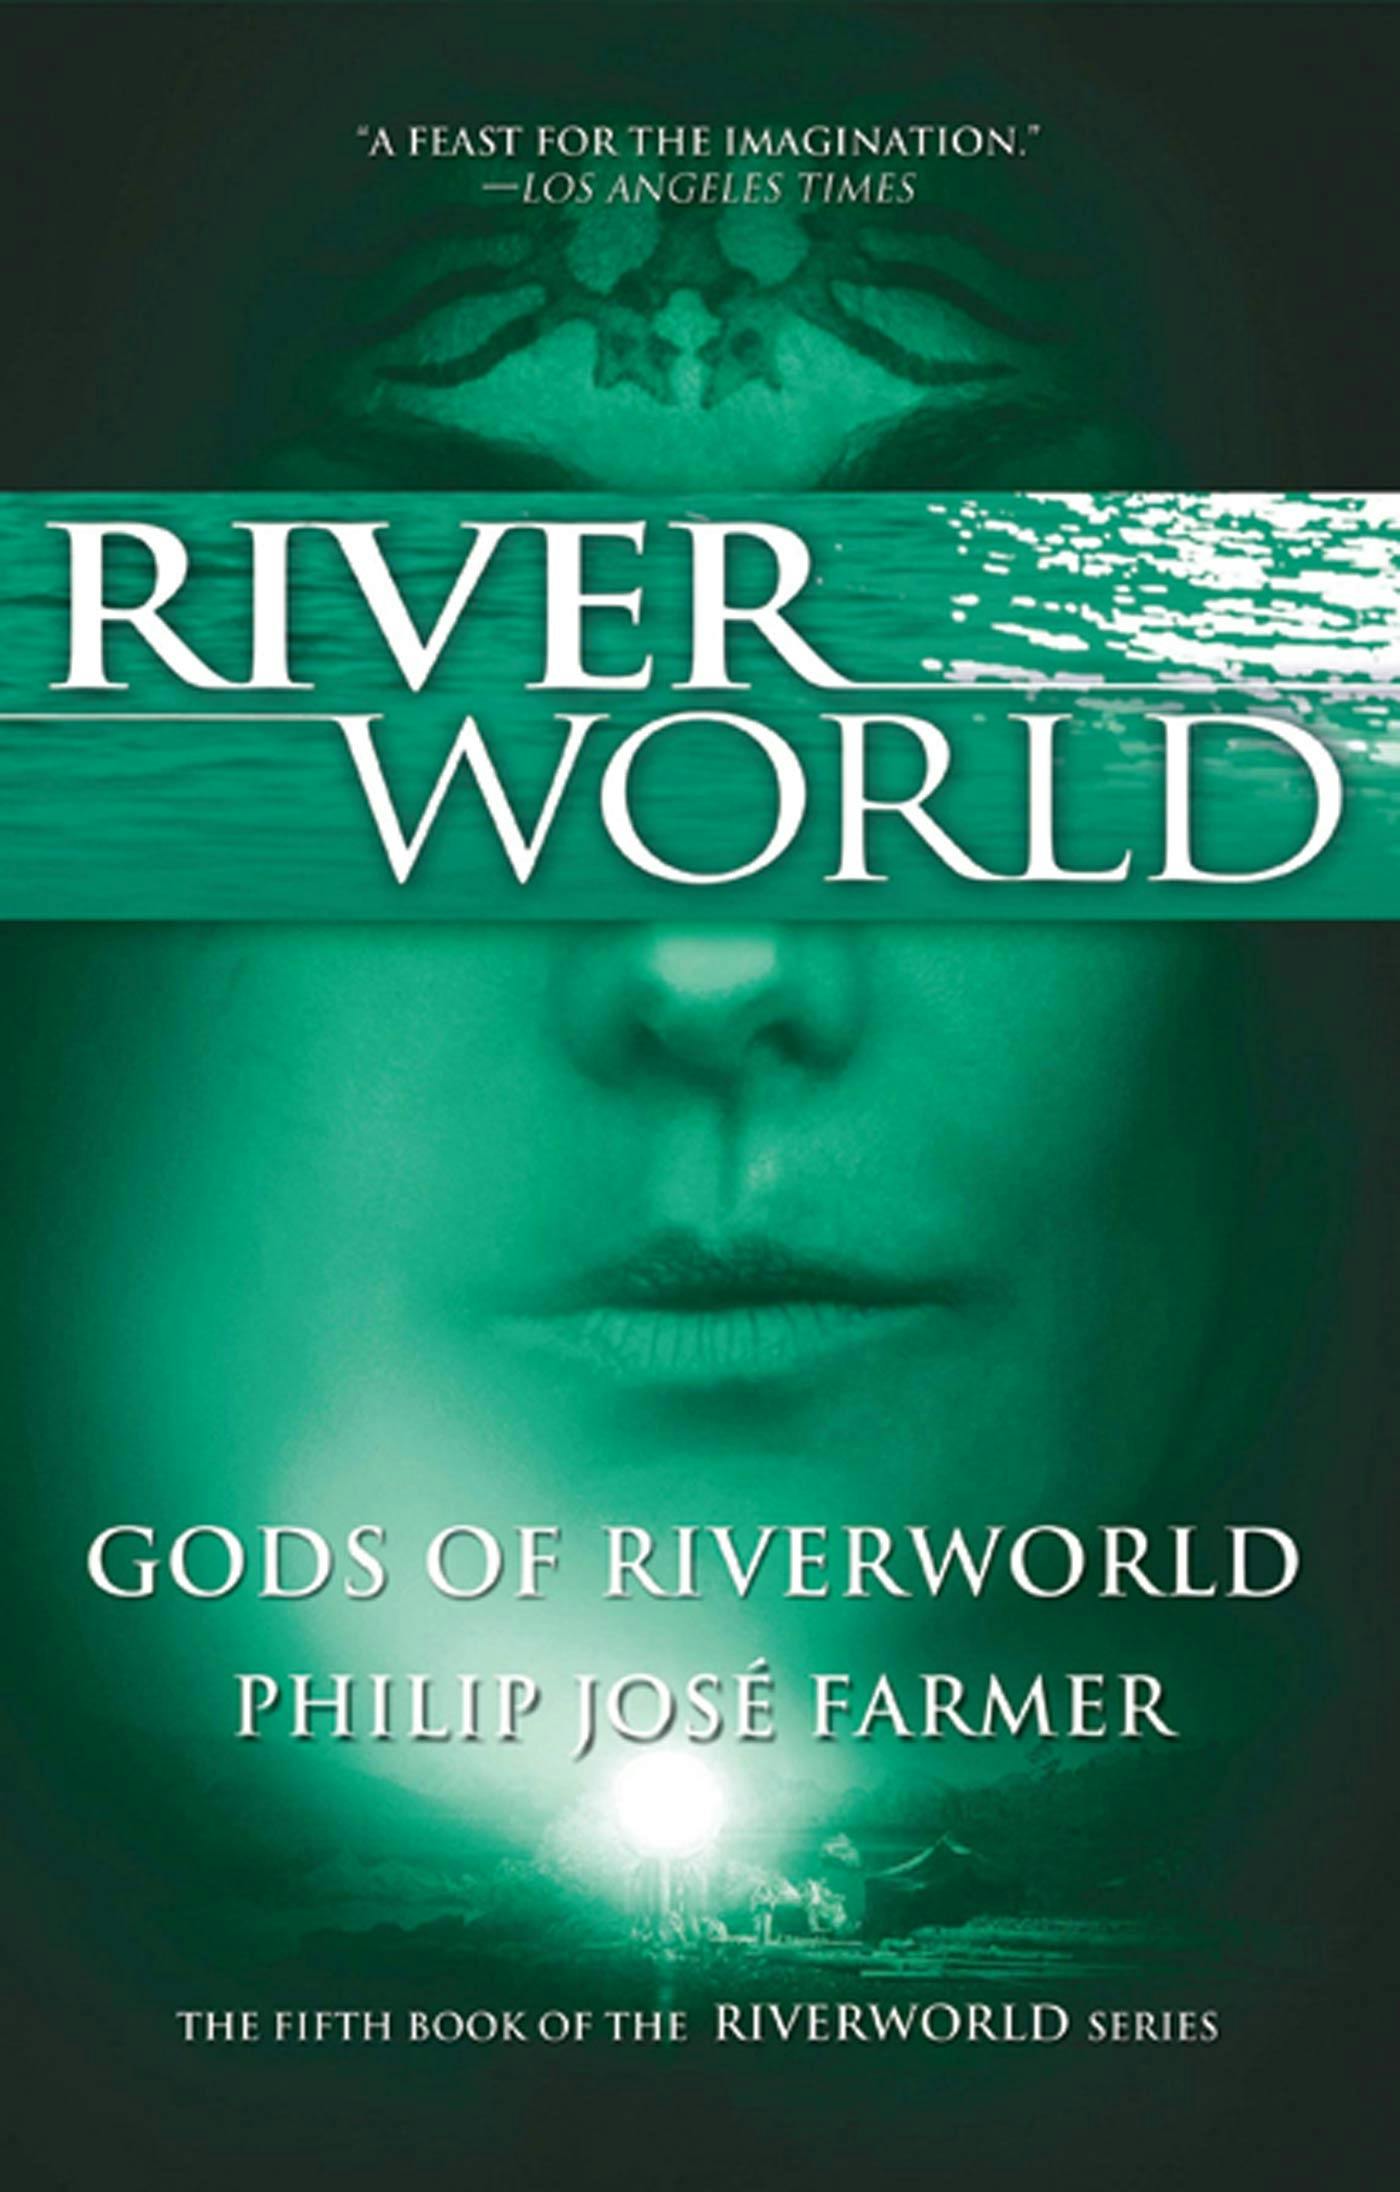 Cover for the book titled as: Gods of Riverworld